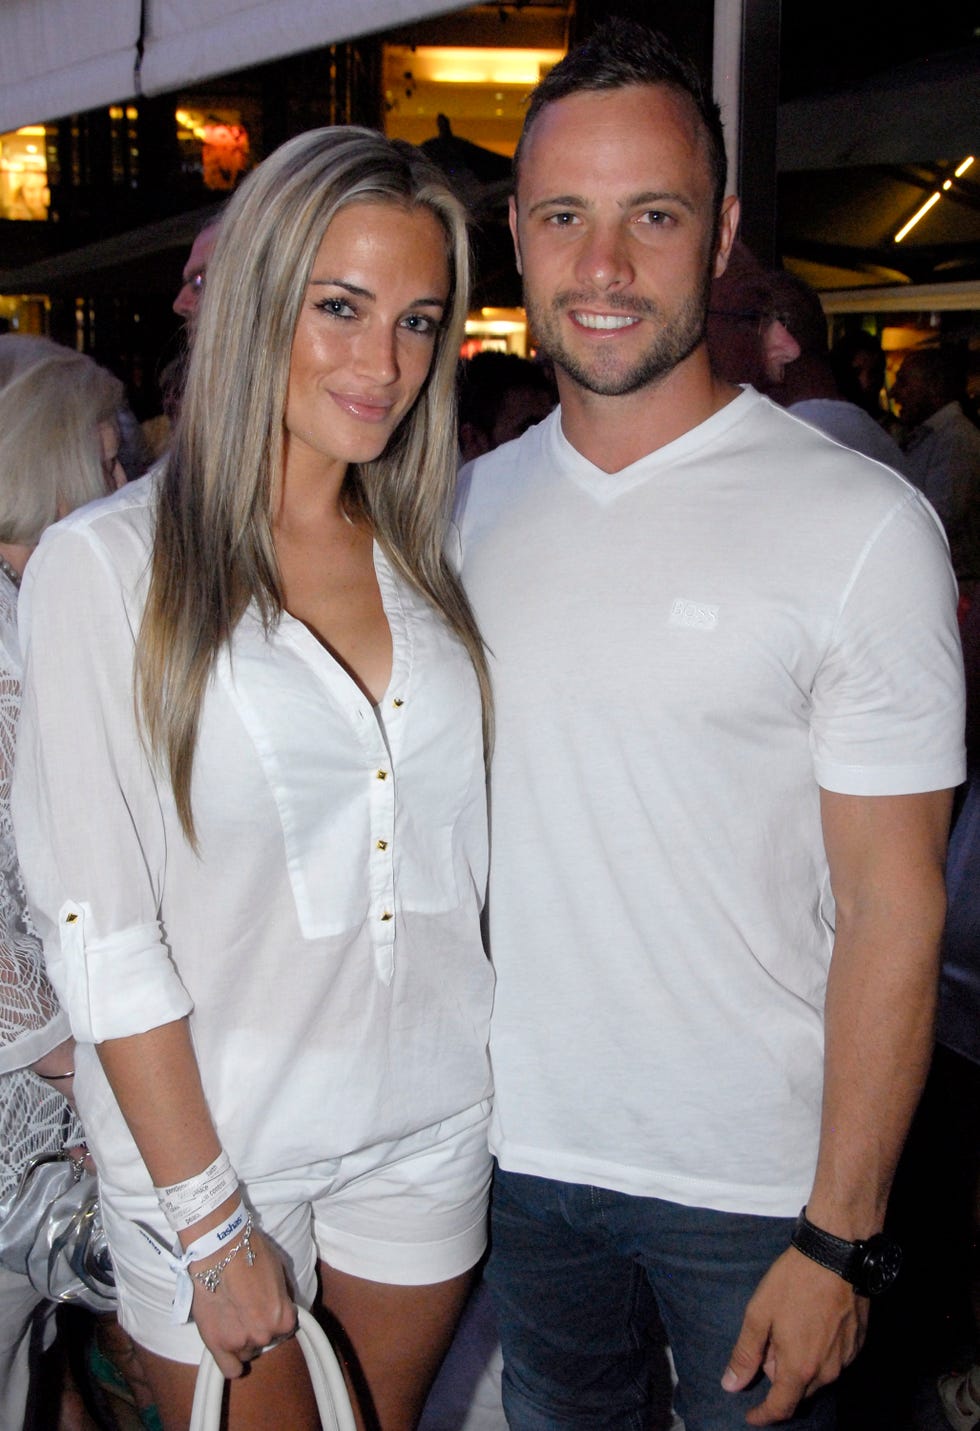 reeva steenkamp and oscar pistorius smile at the camera while standing next to each other, both wear white shirts